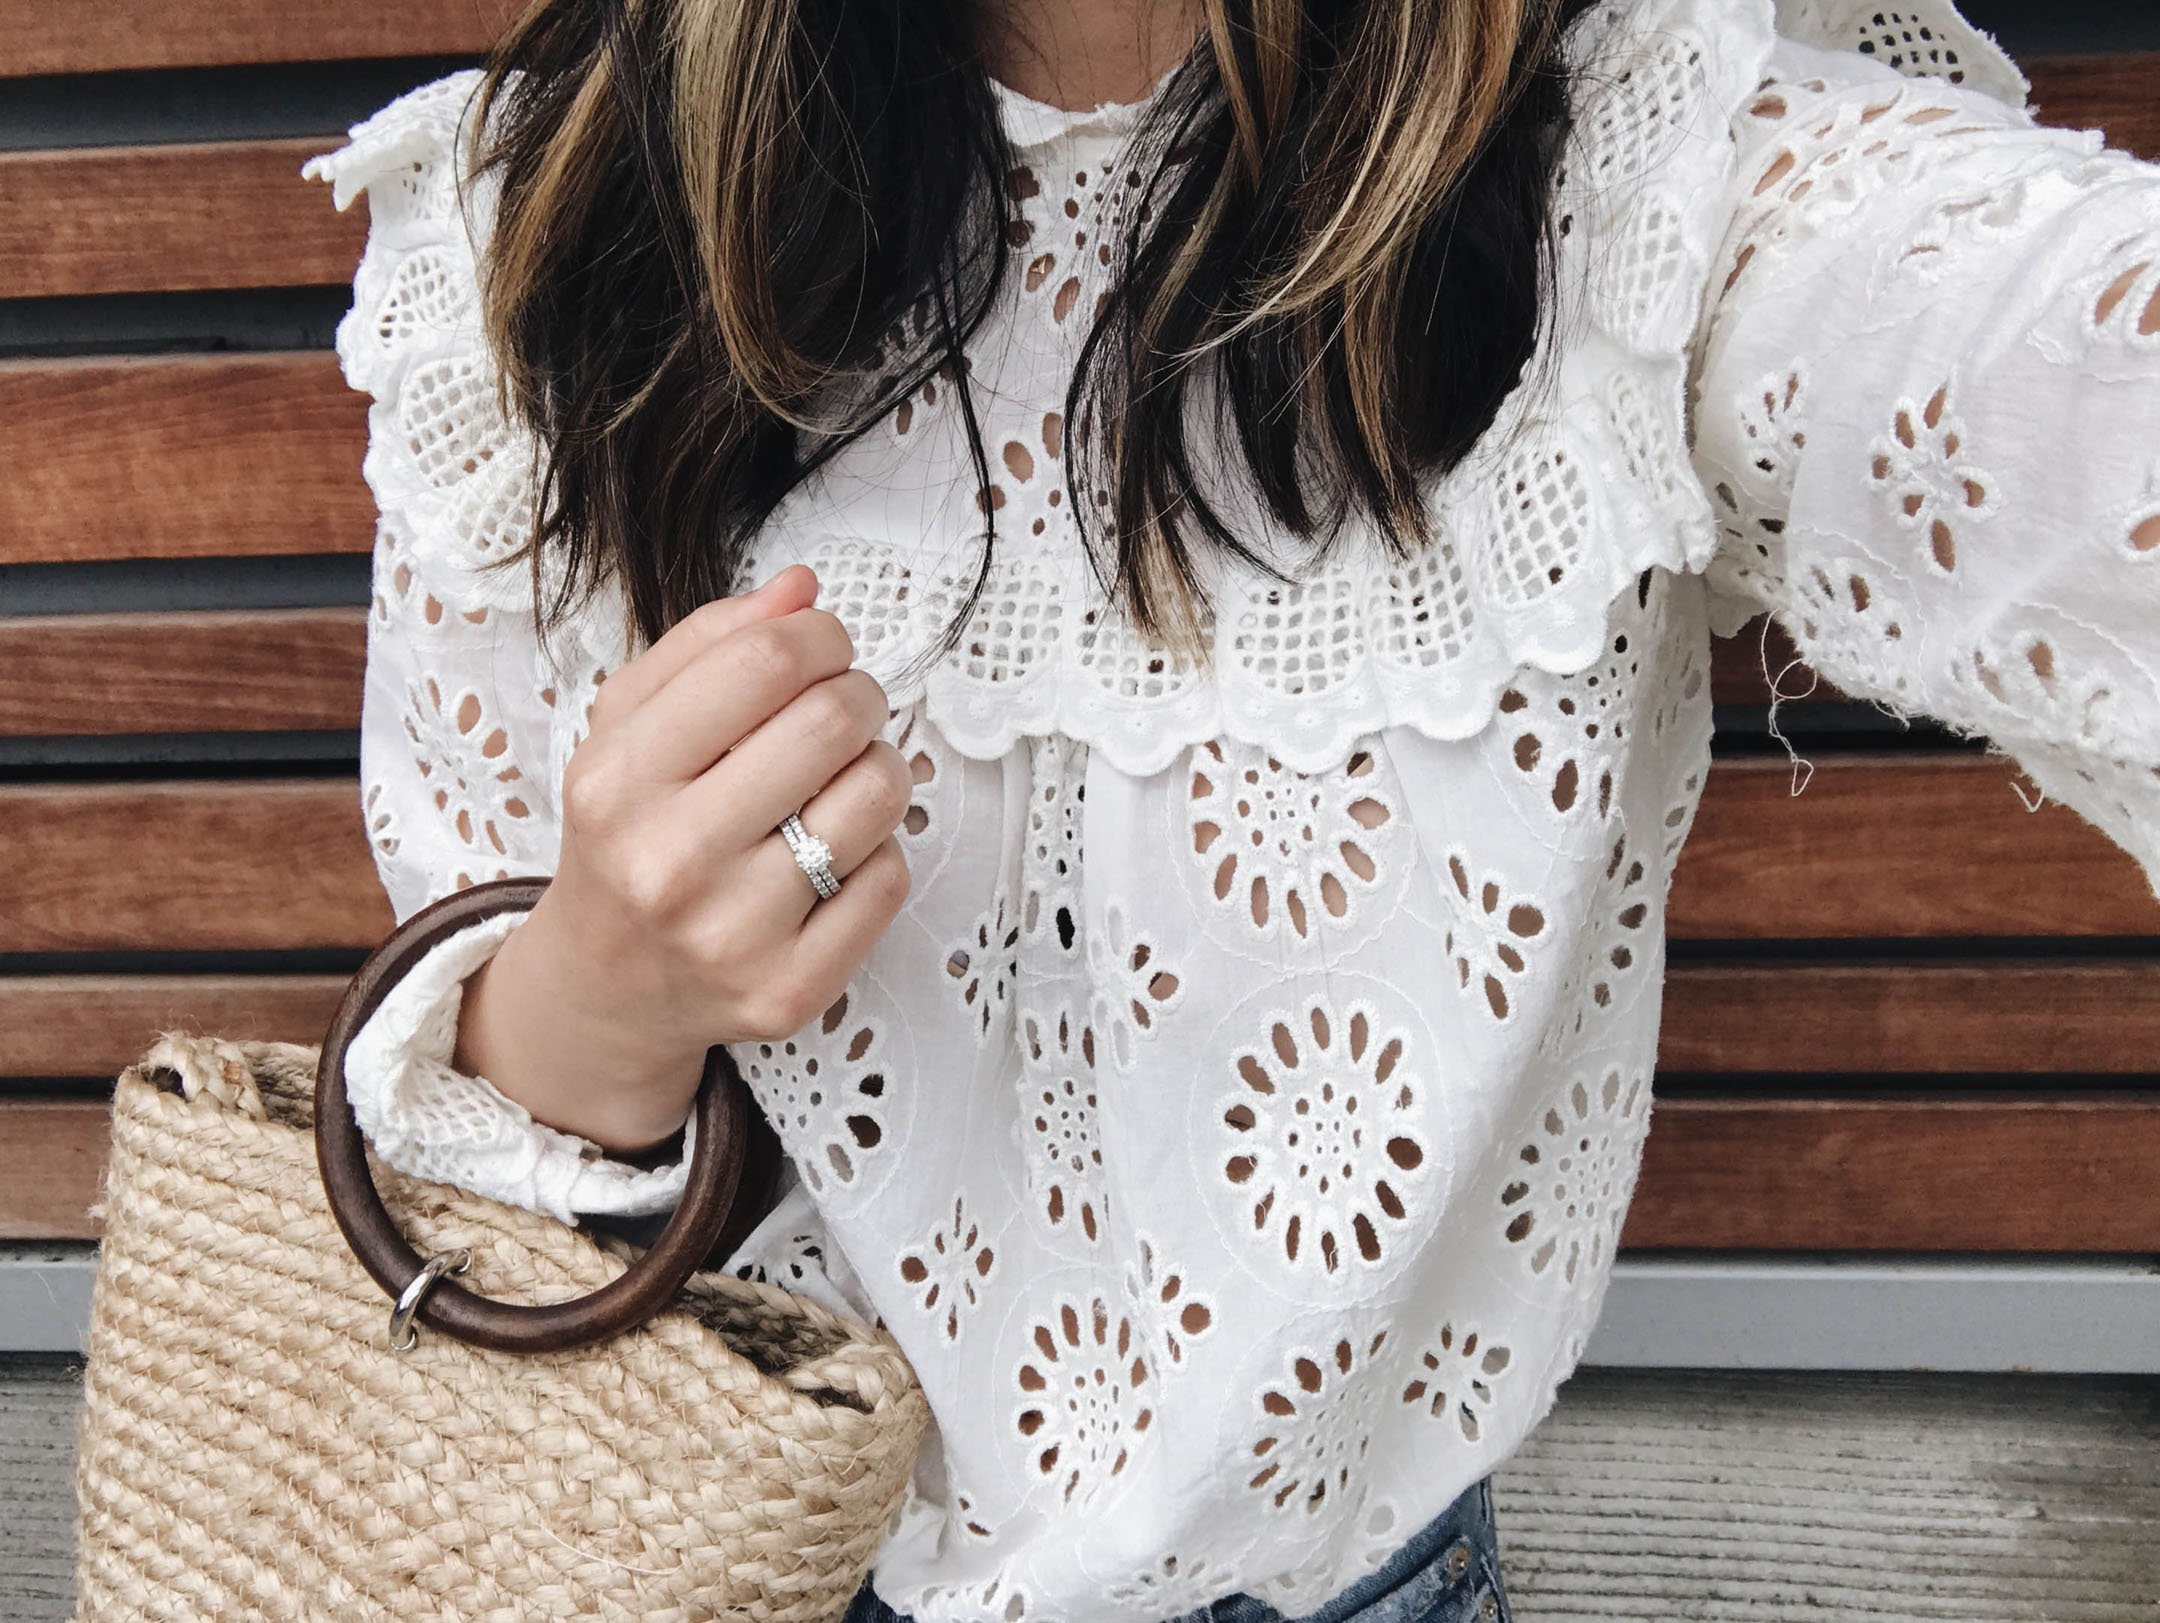 Zara embroidered blouse